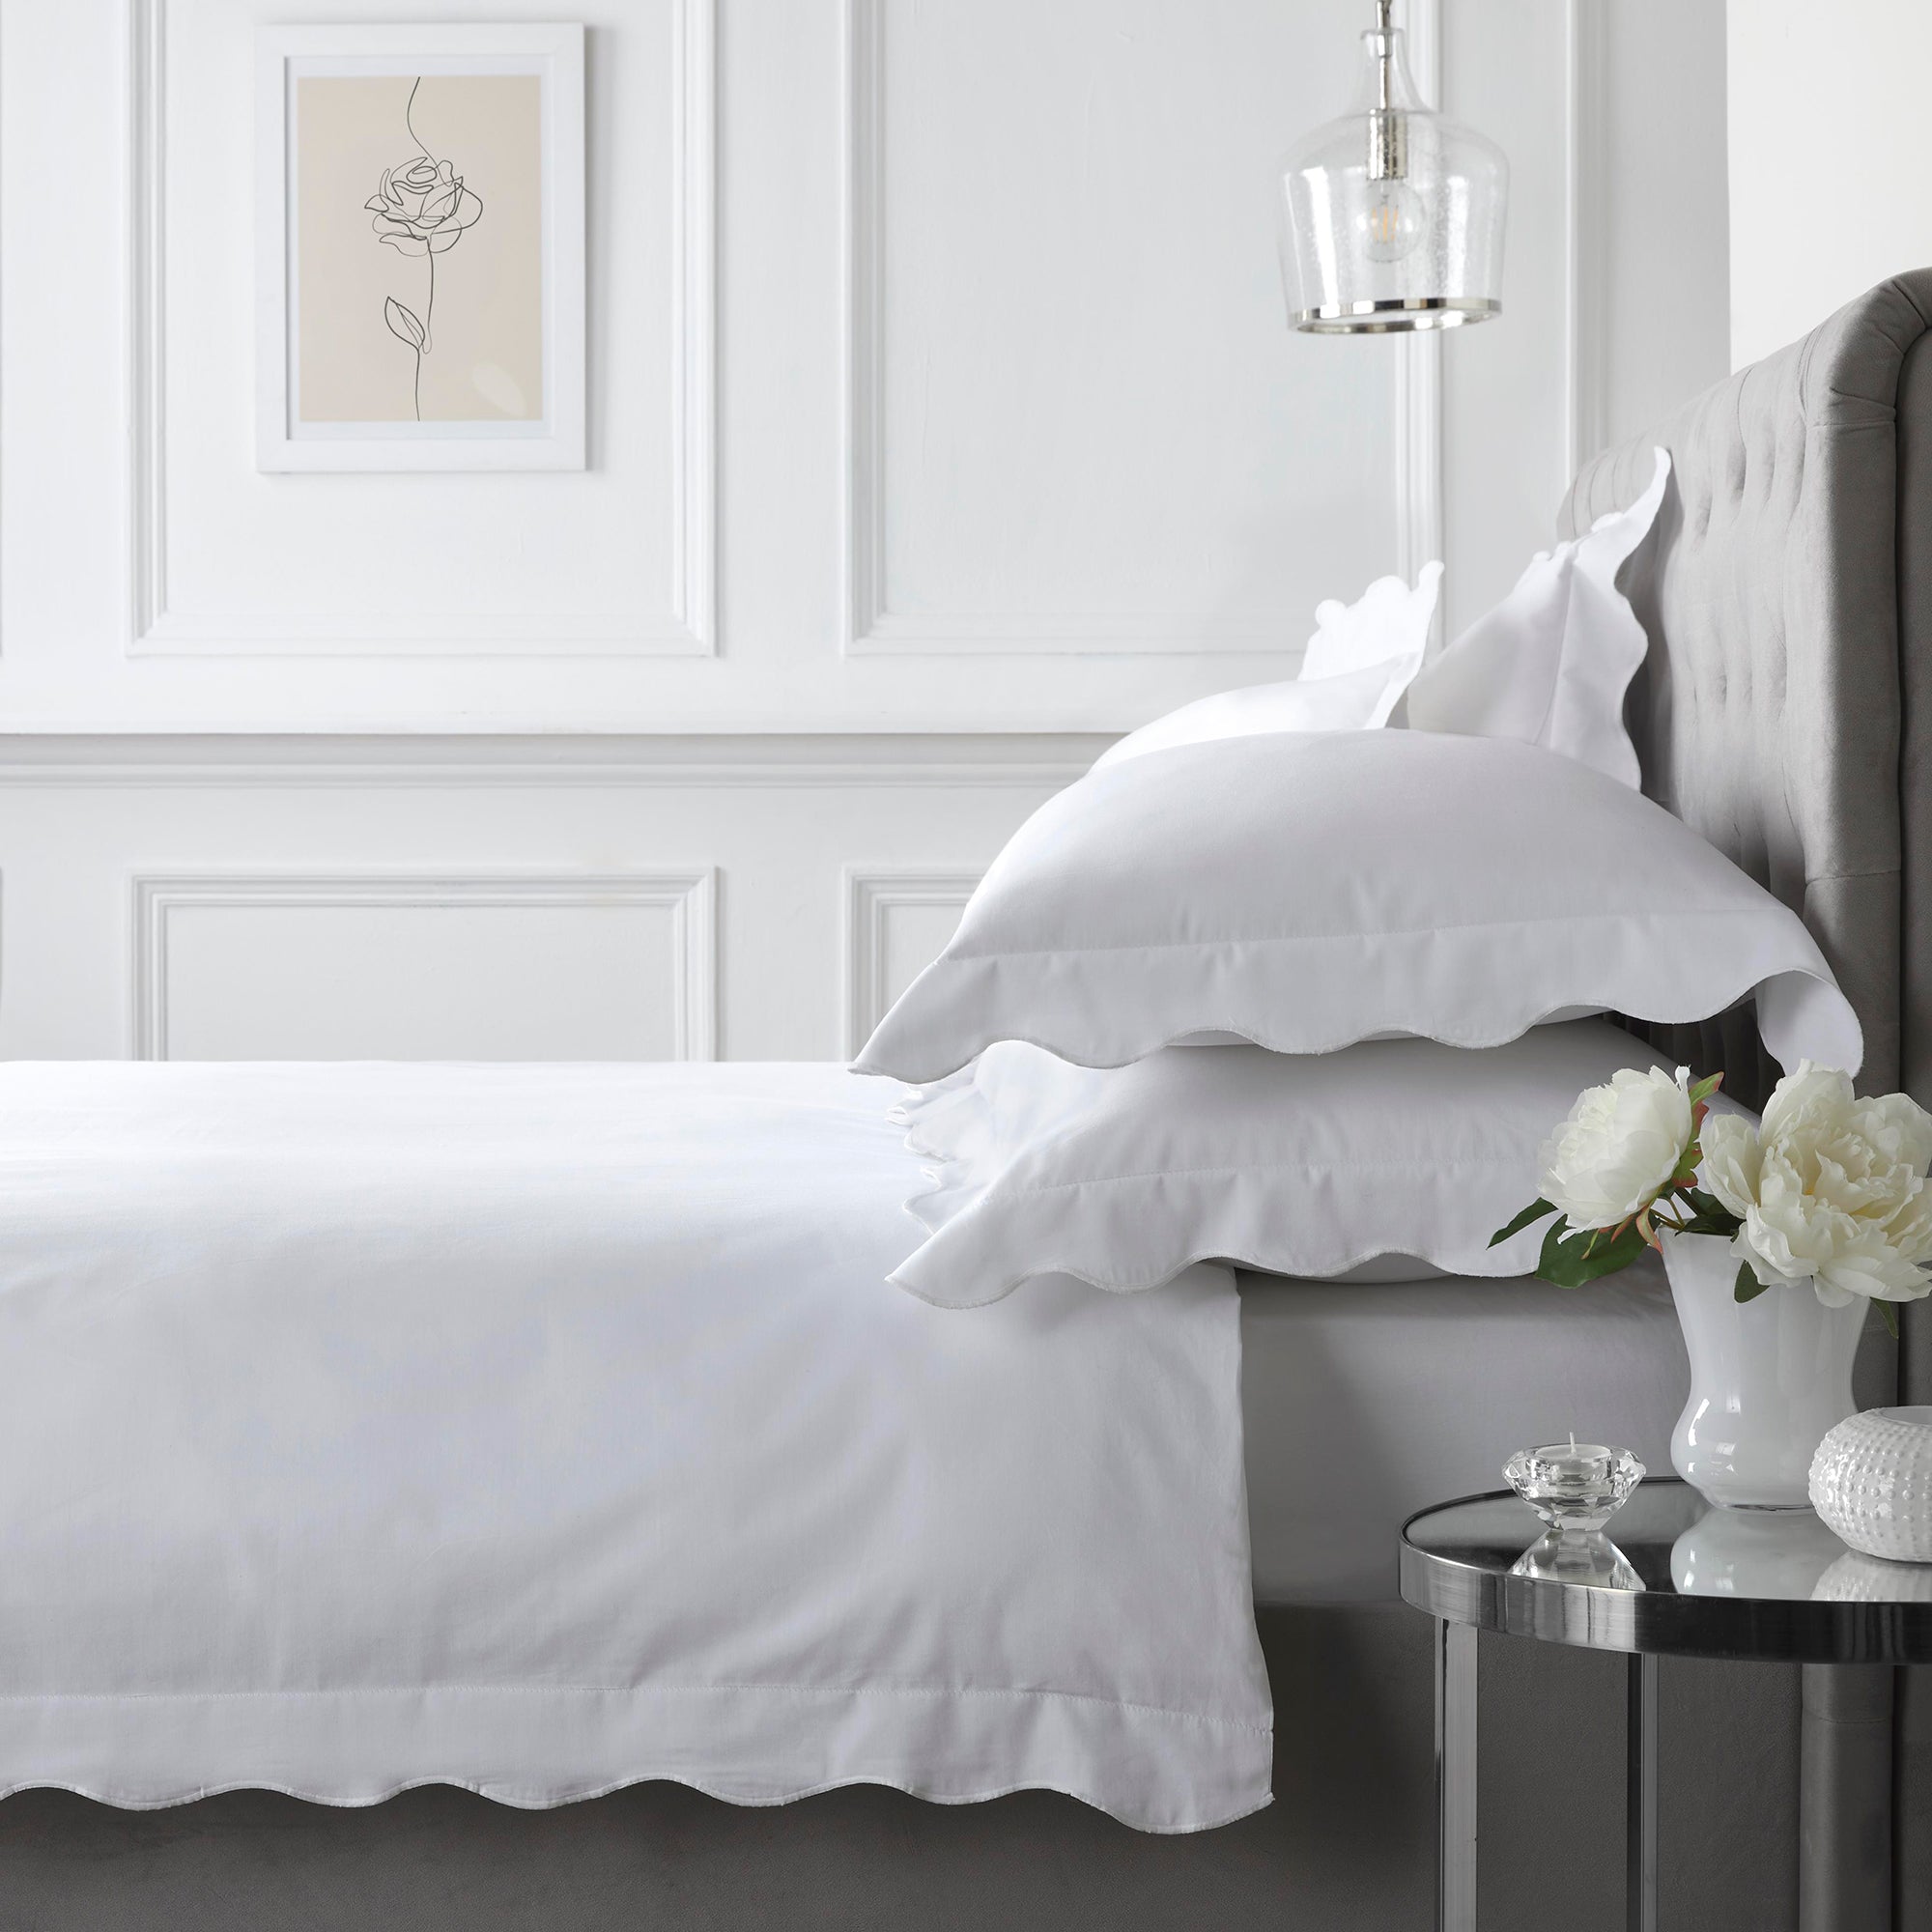 Duvet Cover Set Scallop Edge by Appletree Boutique in White